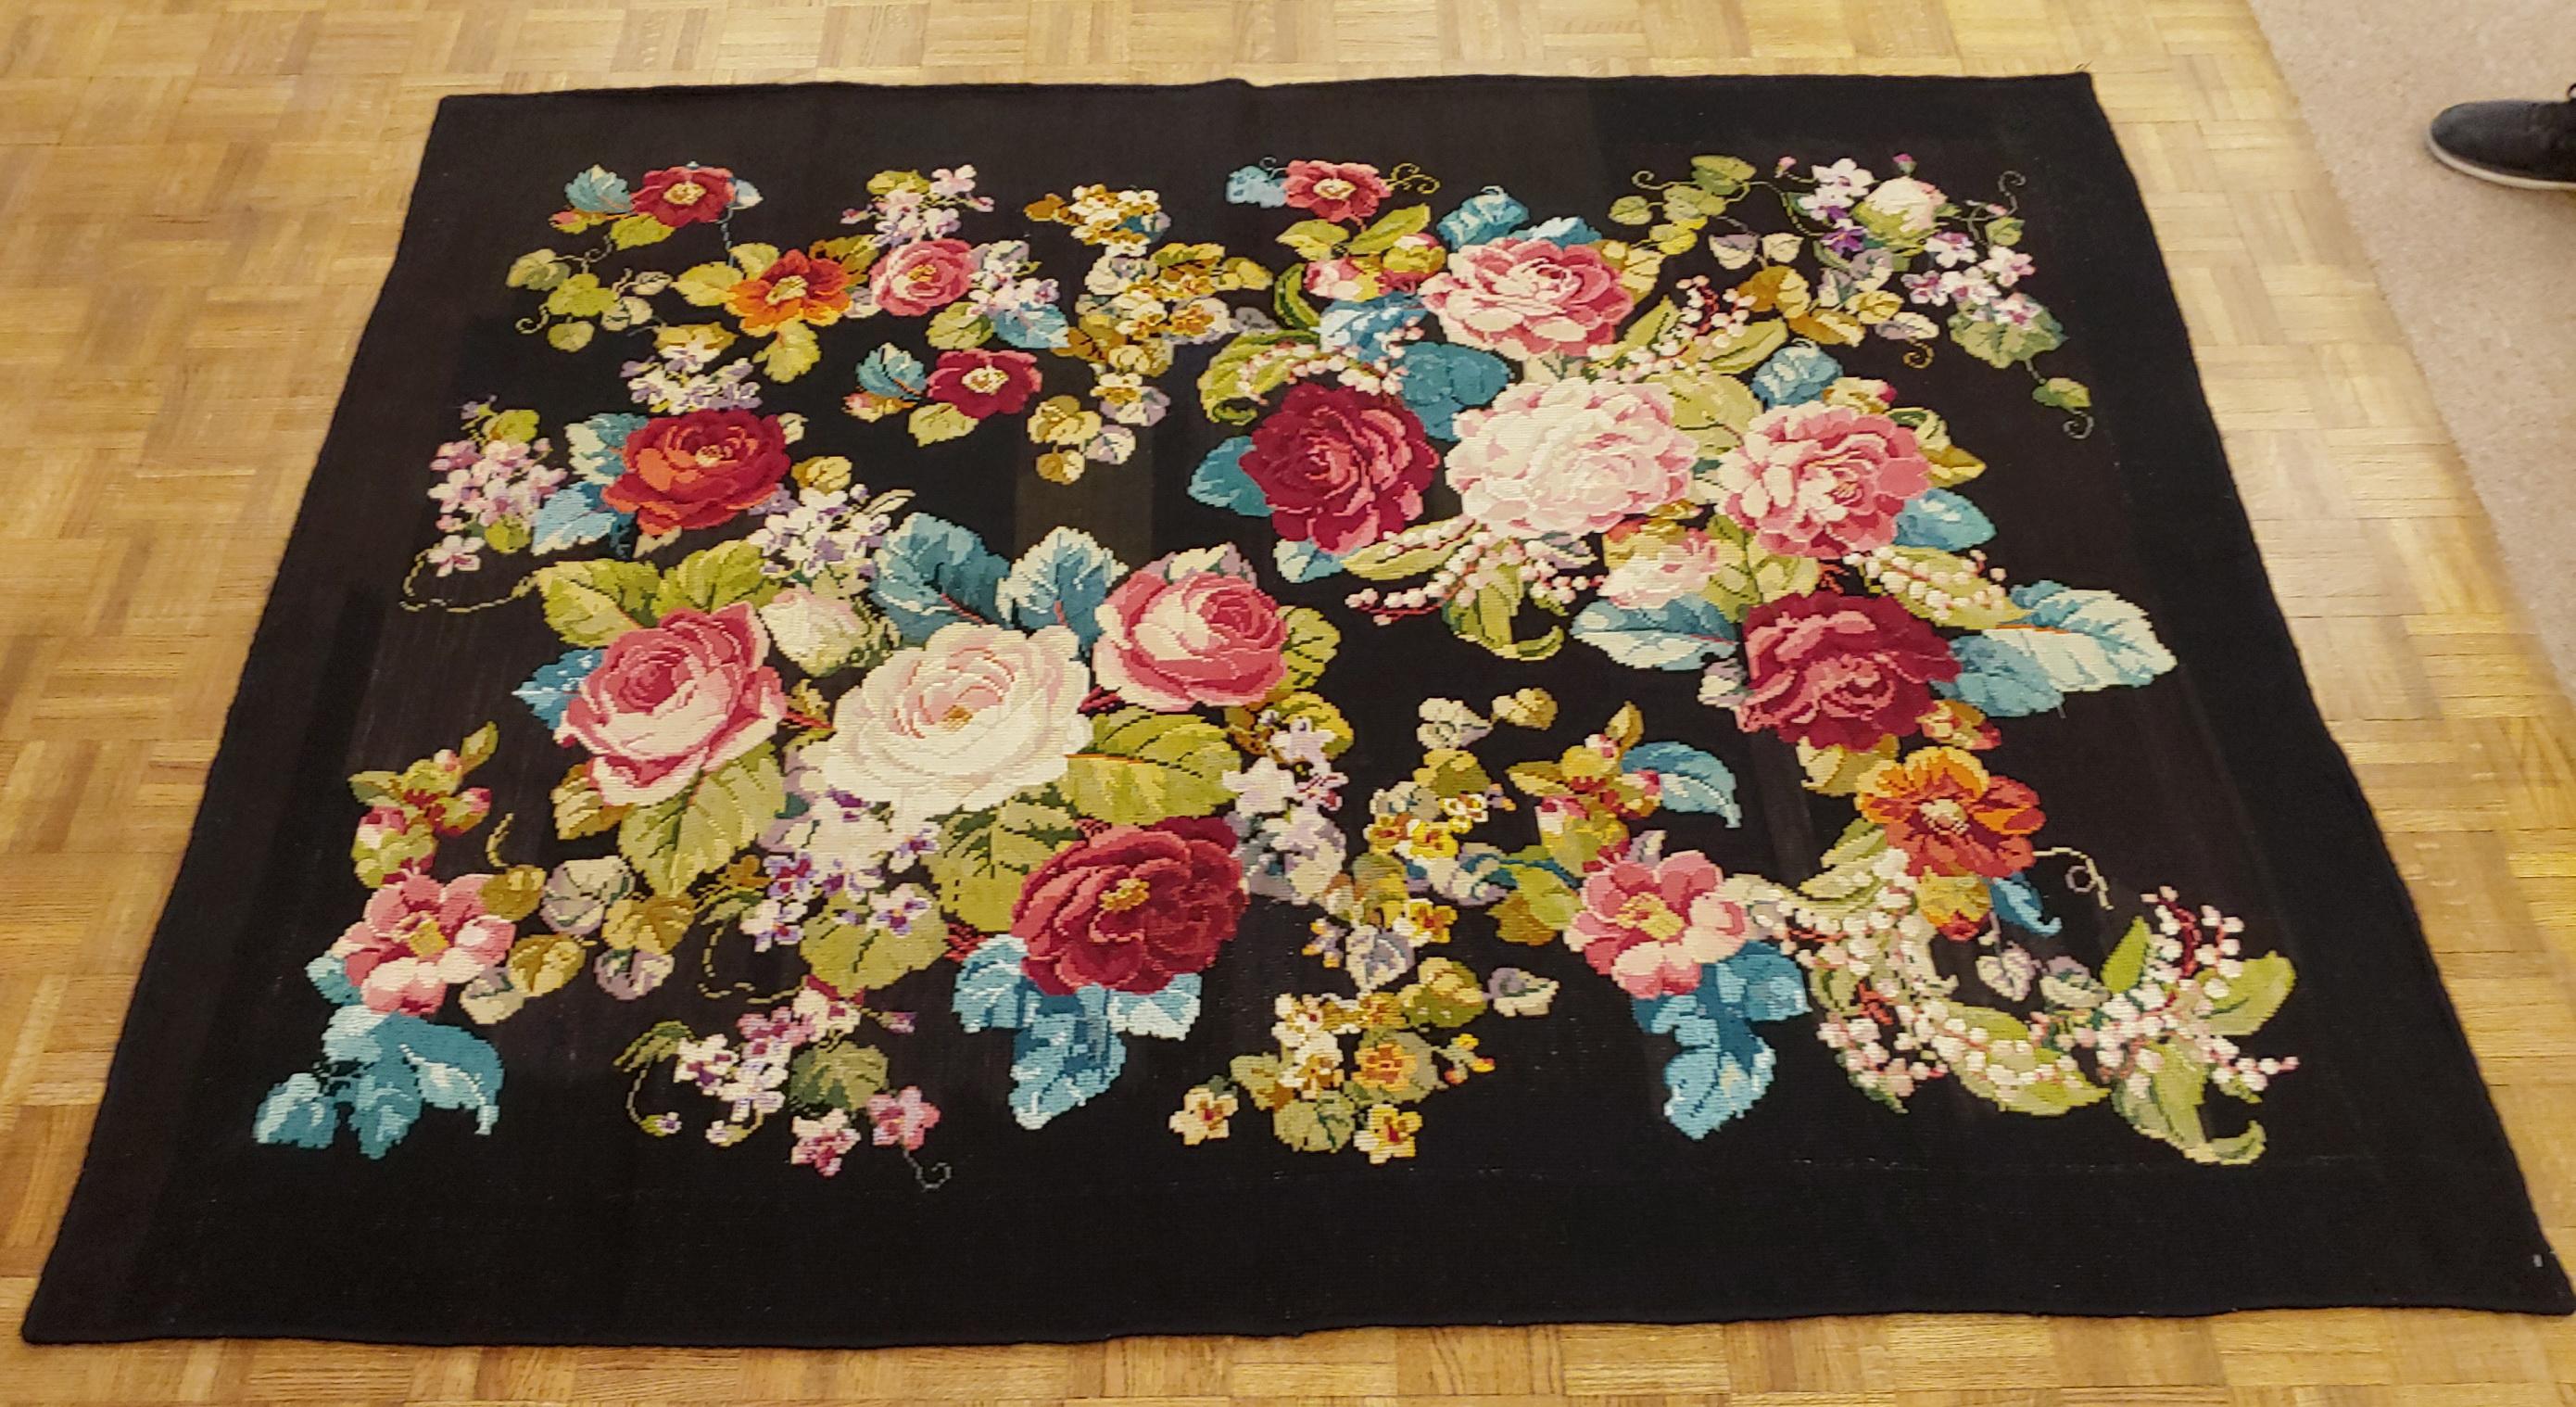 This is a beautiful early English needlepoint done in the traditional Victorian or European motif of bright flowers on a black background, It is 4-6 x 7, circa 1900.